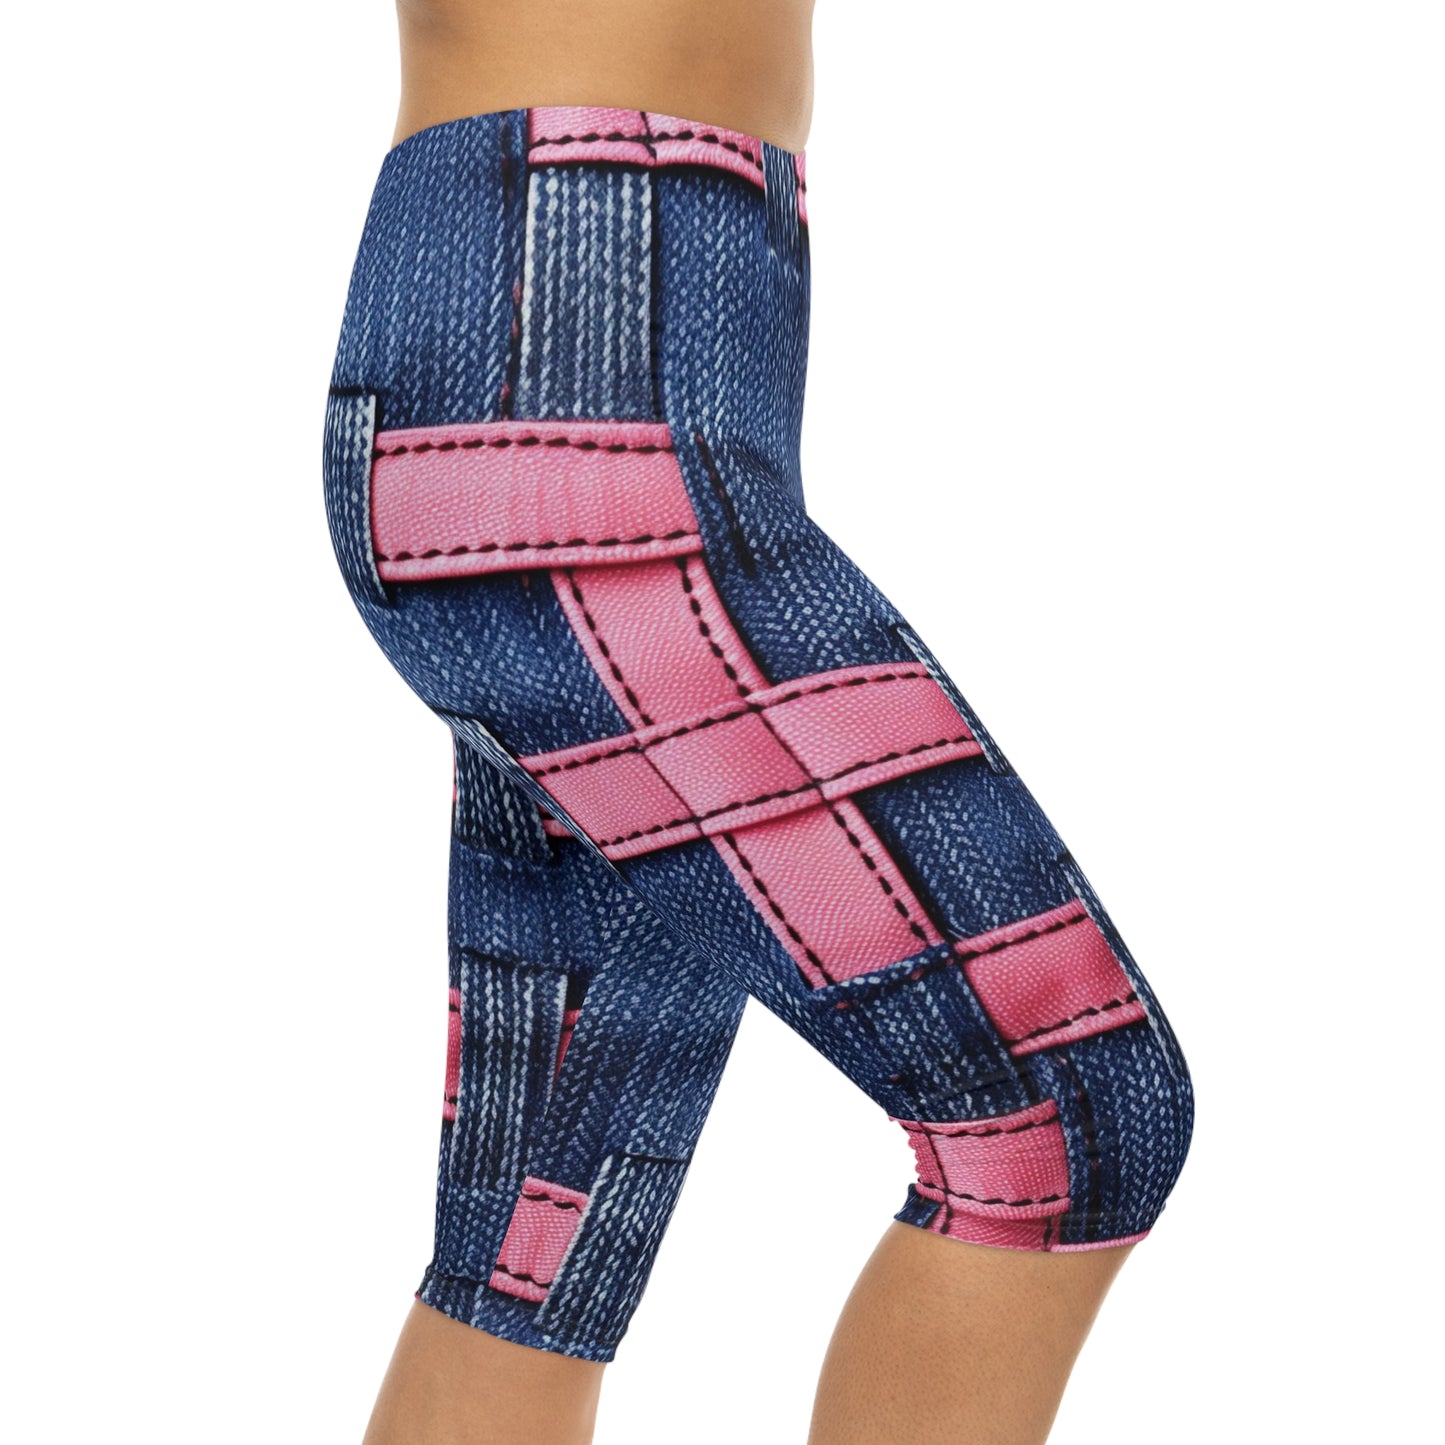 Candy-Striped Crossover: Pink Denim Ribbons Dancing on Blue Stage - Women’s Capri Leggings (AOP)